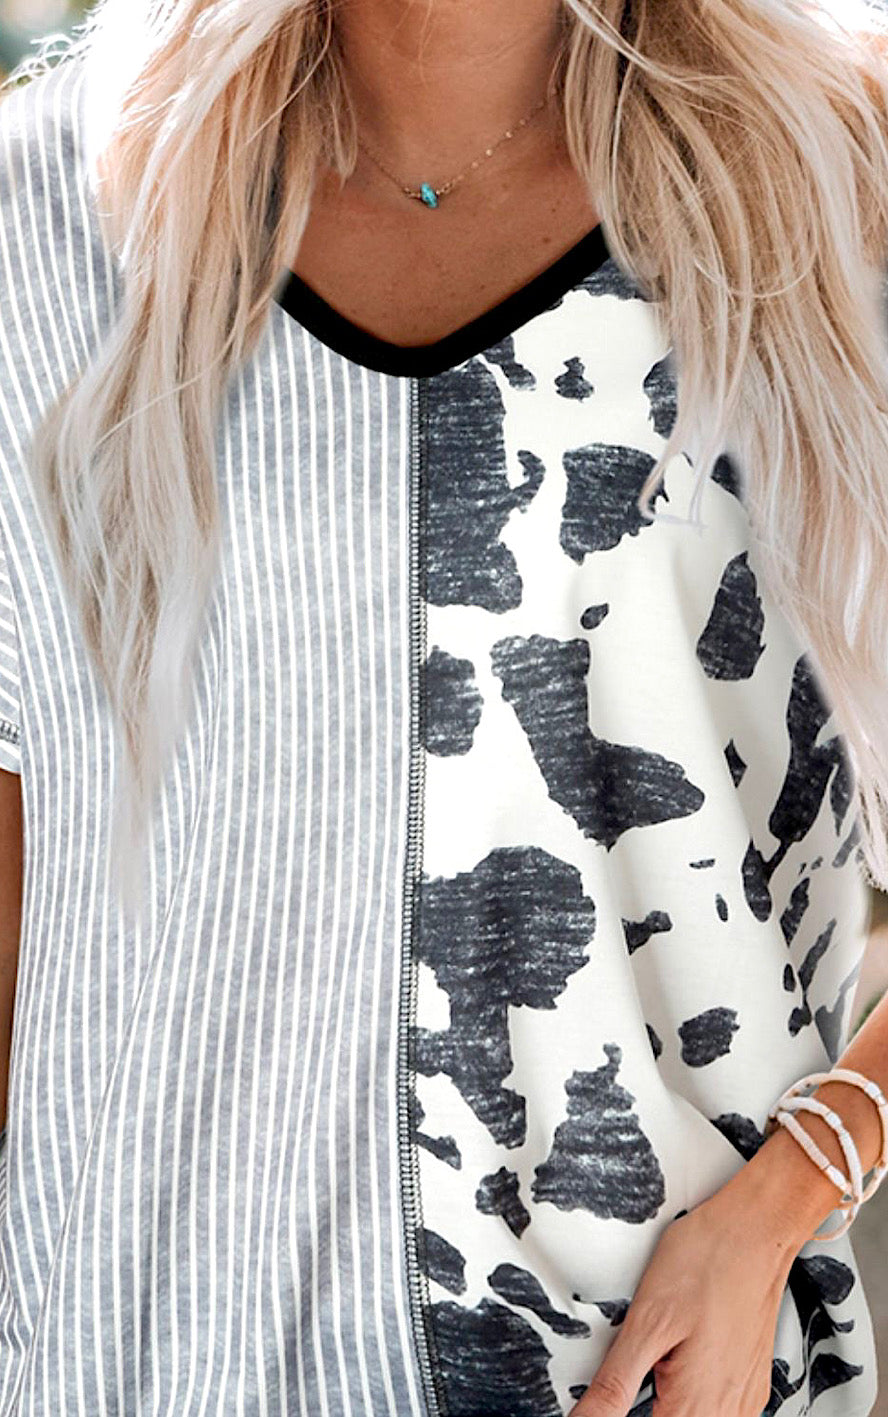 Showing Off Grey Striped Animal Print Top